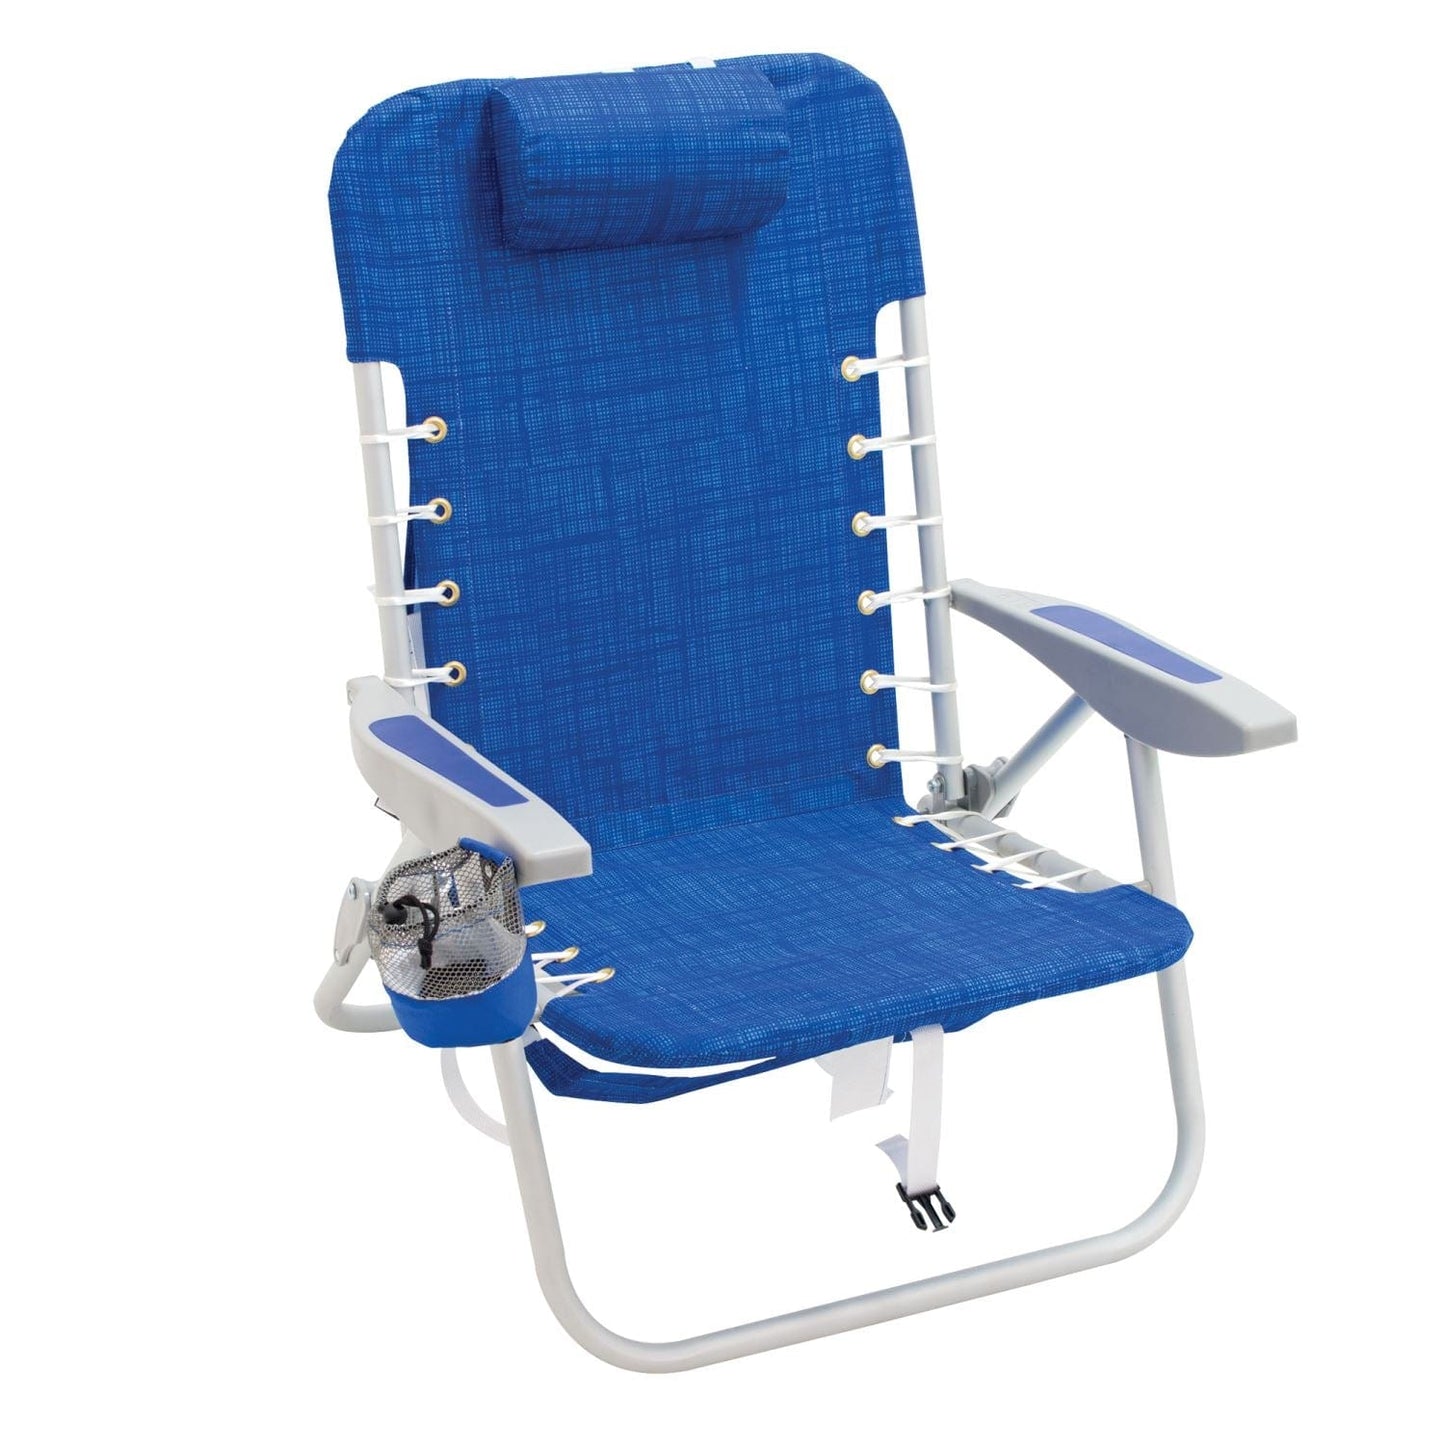 The Fulfiller Backpack chair RIO Gear | 4-Position Lace-Up Backpack Chair - Blue SC529-1913-1